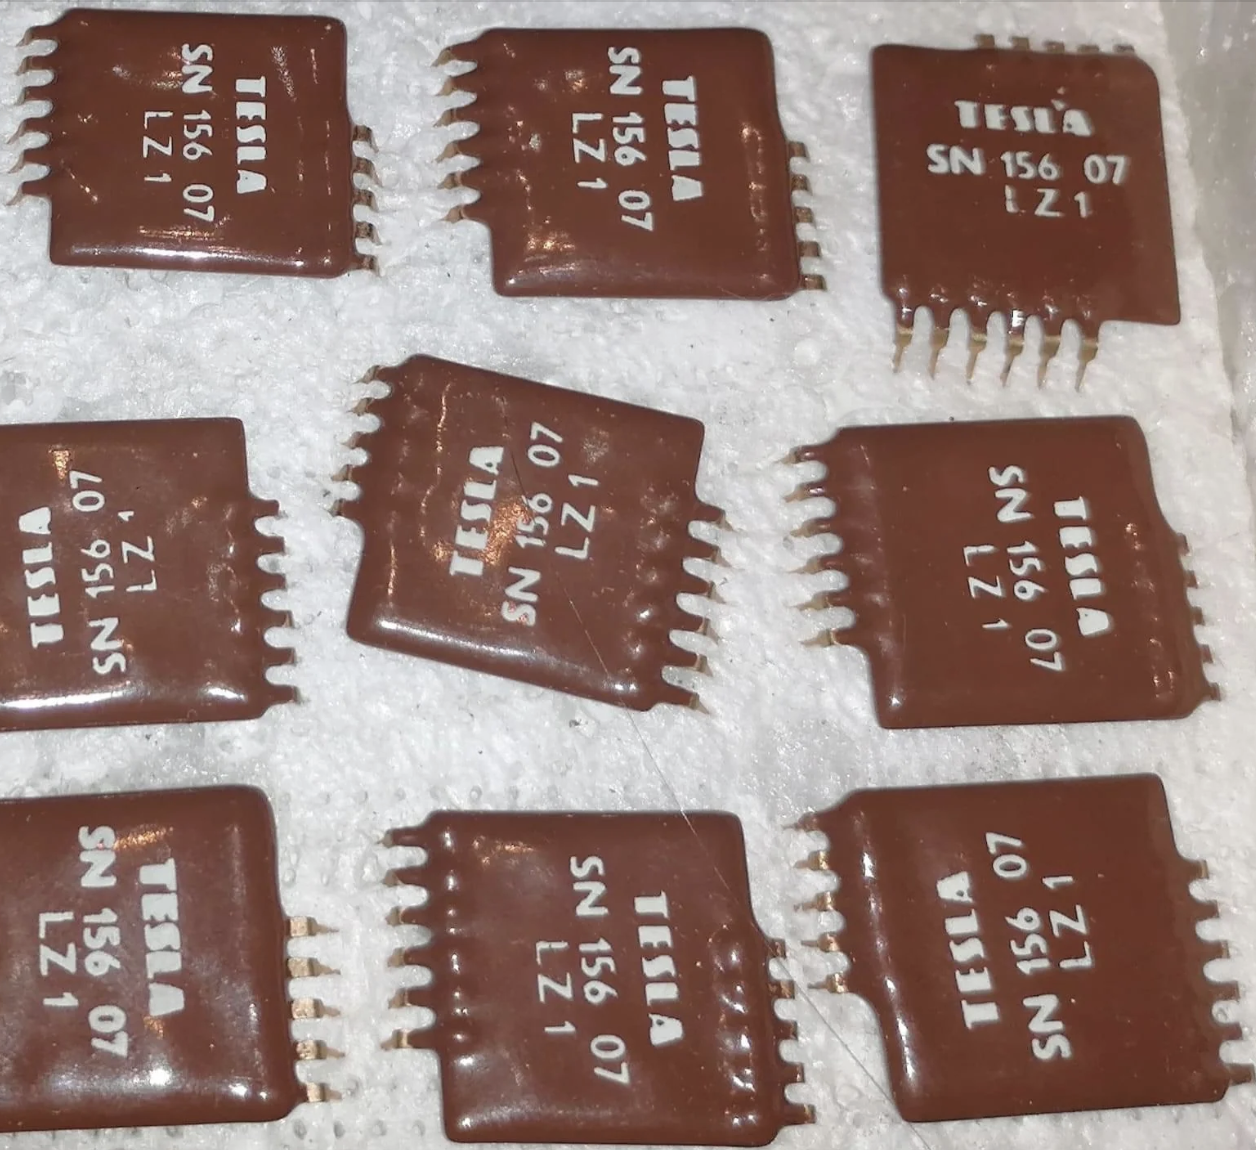 They look like chocolate squares with &quot;Tesla&quot; and a code number on them